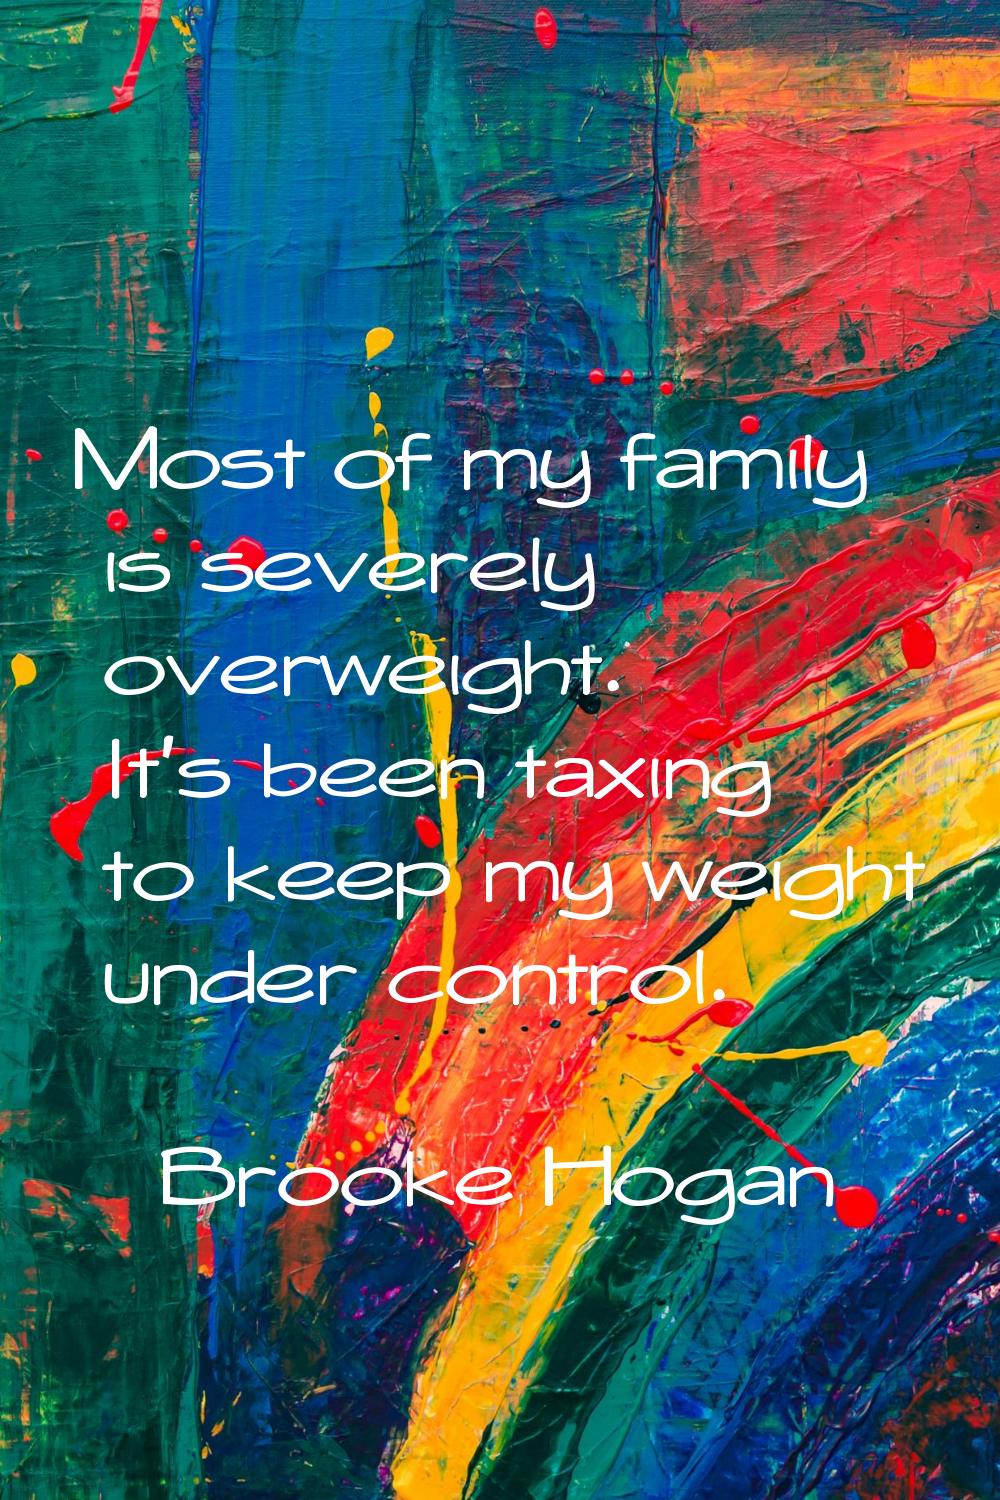 Most of my family is severely overweight. It's been taxing to keep my weight under control.